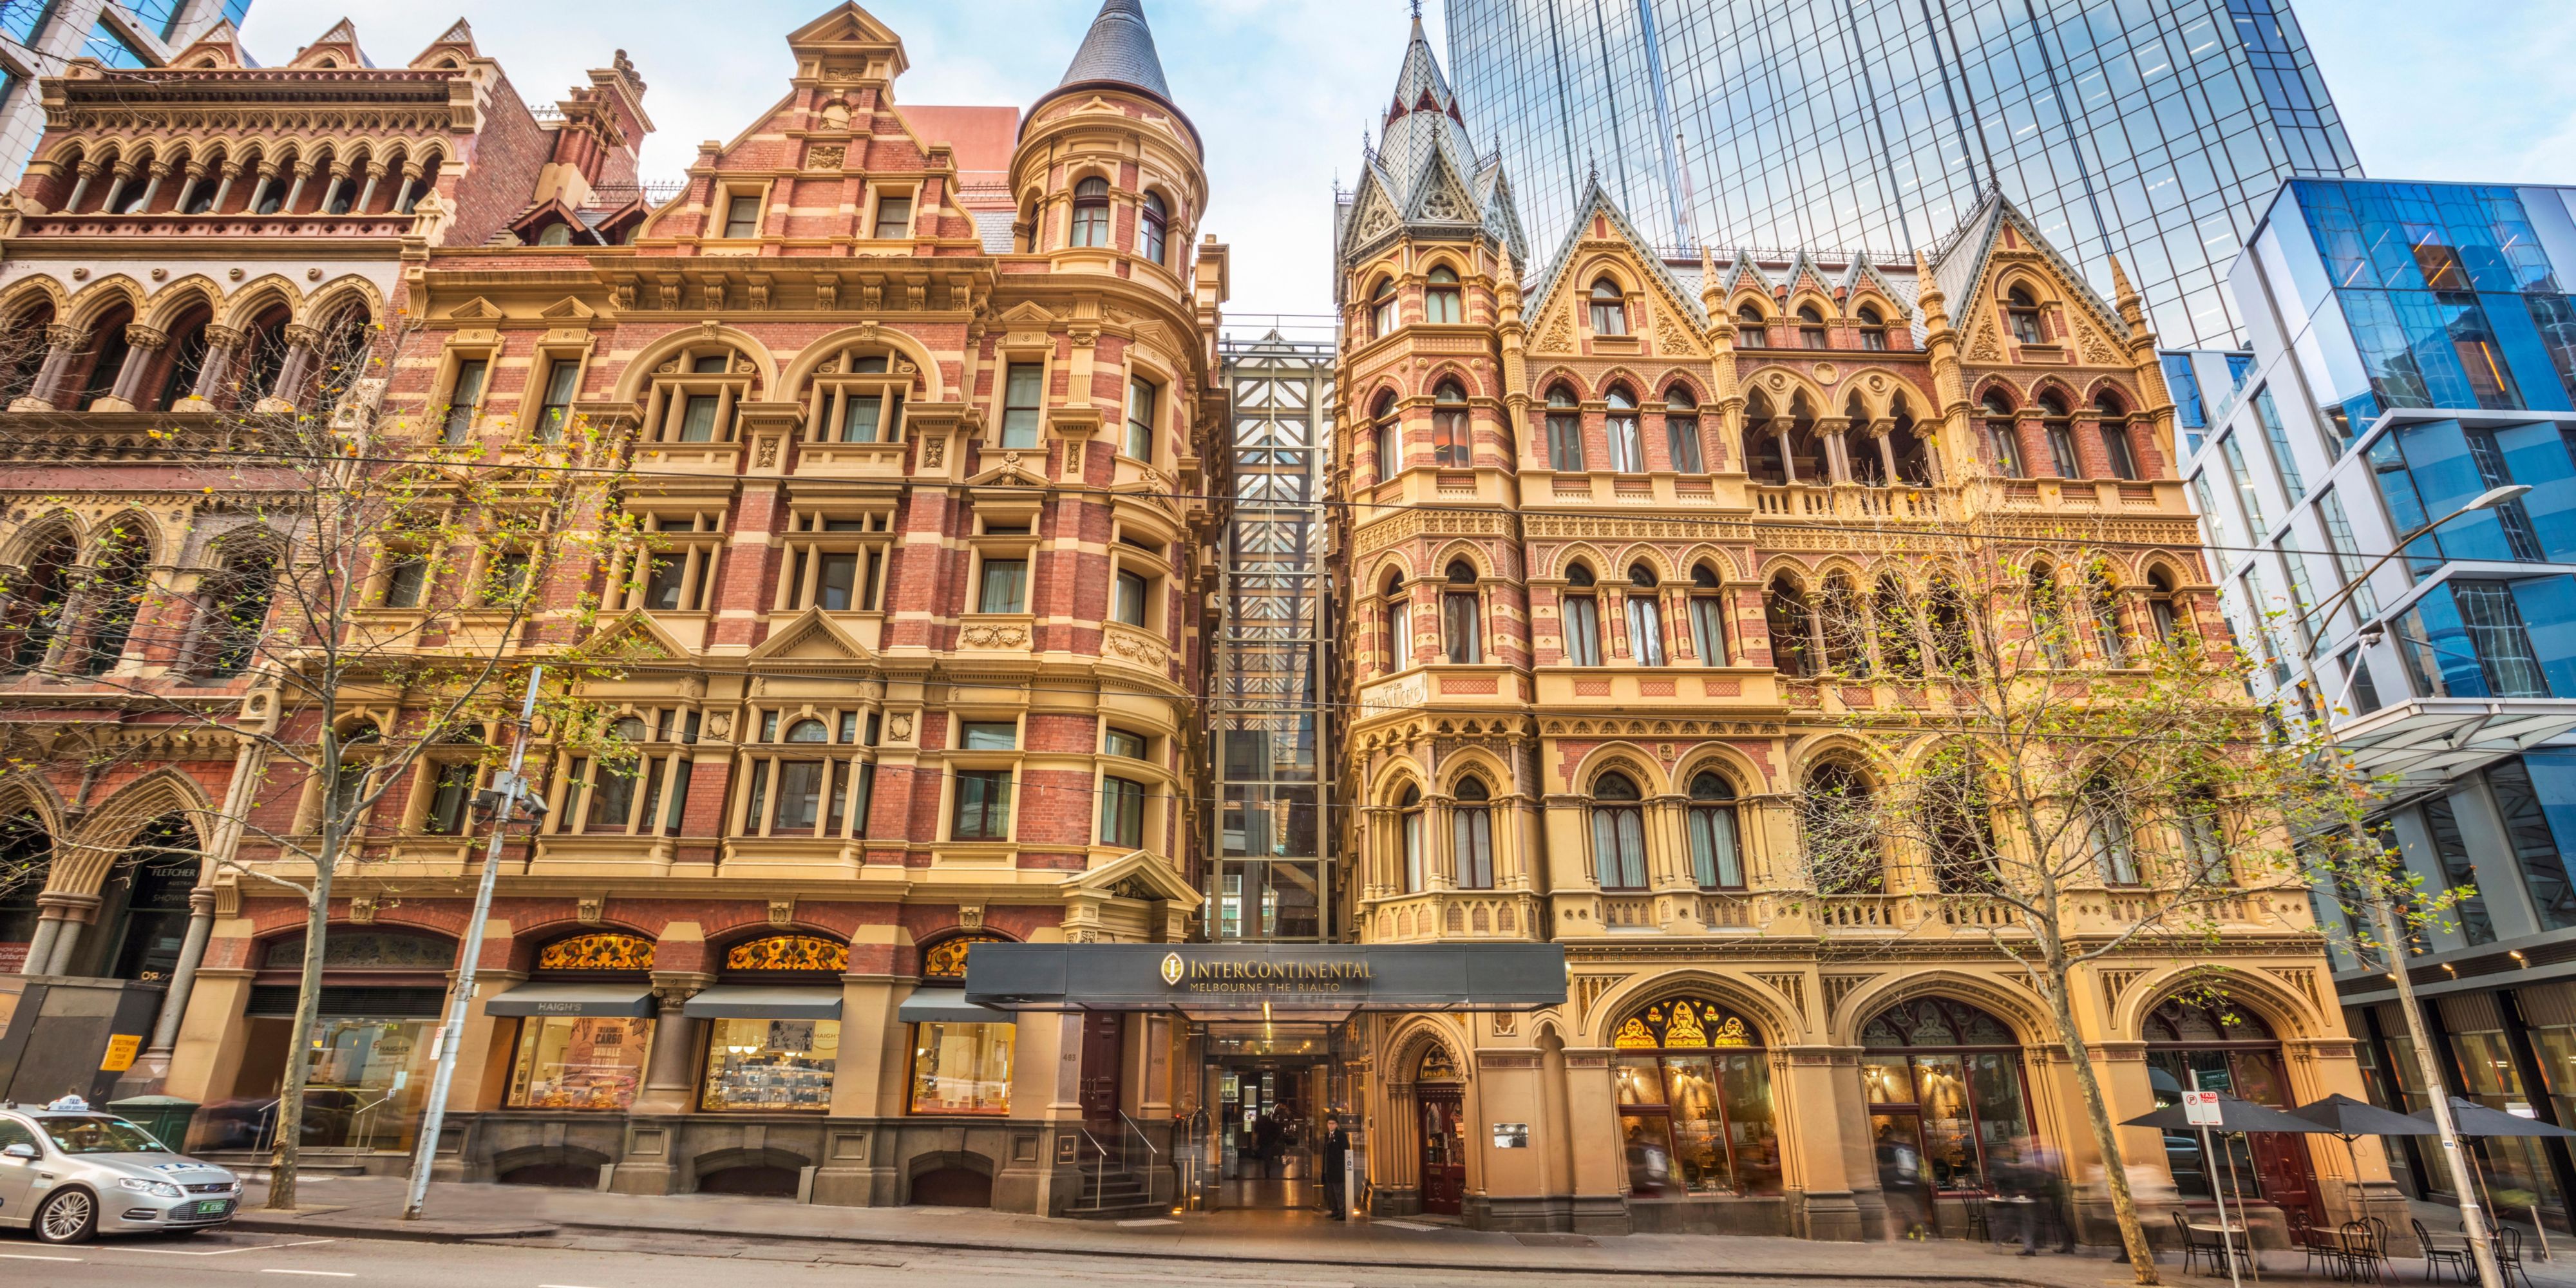 Considered one of the finest ‘boom style’ buildings in Melbourne, the stunning Rialto was built in 1891, and completed during the Gold Rush. The iconic landmark was designed in the neo-Gothic style by celebrated architect William Pitt.